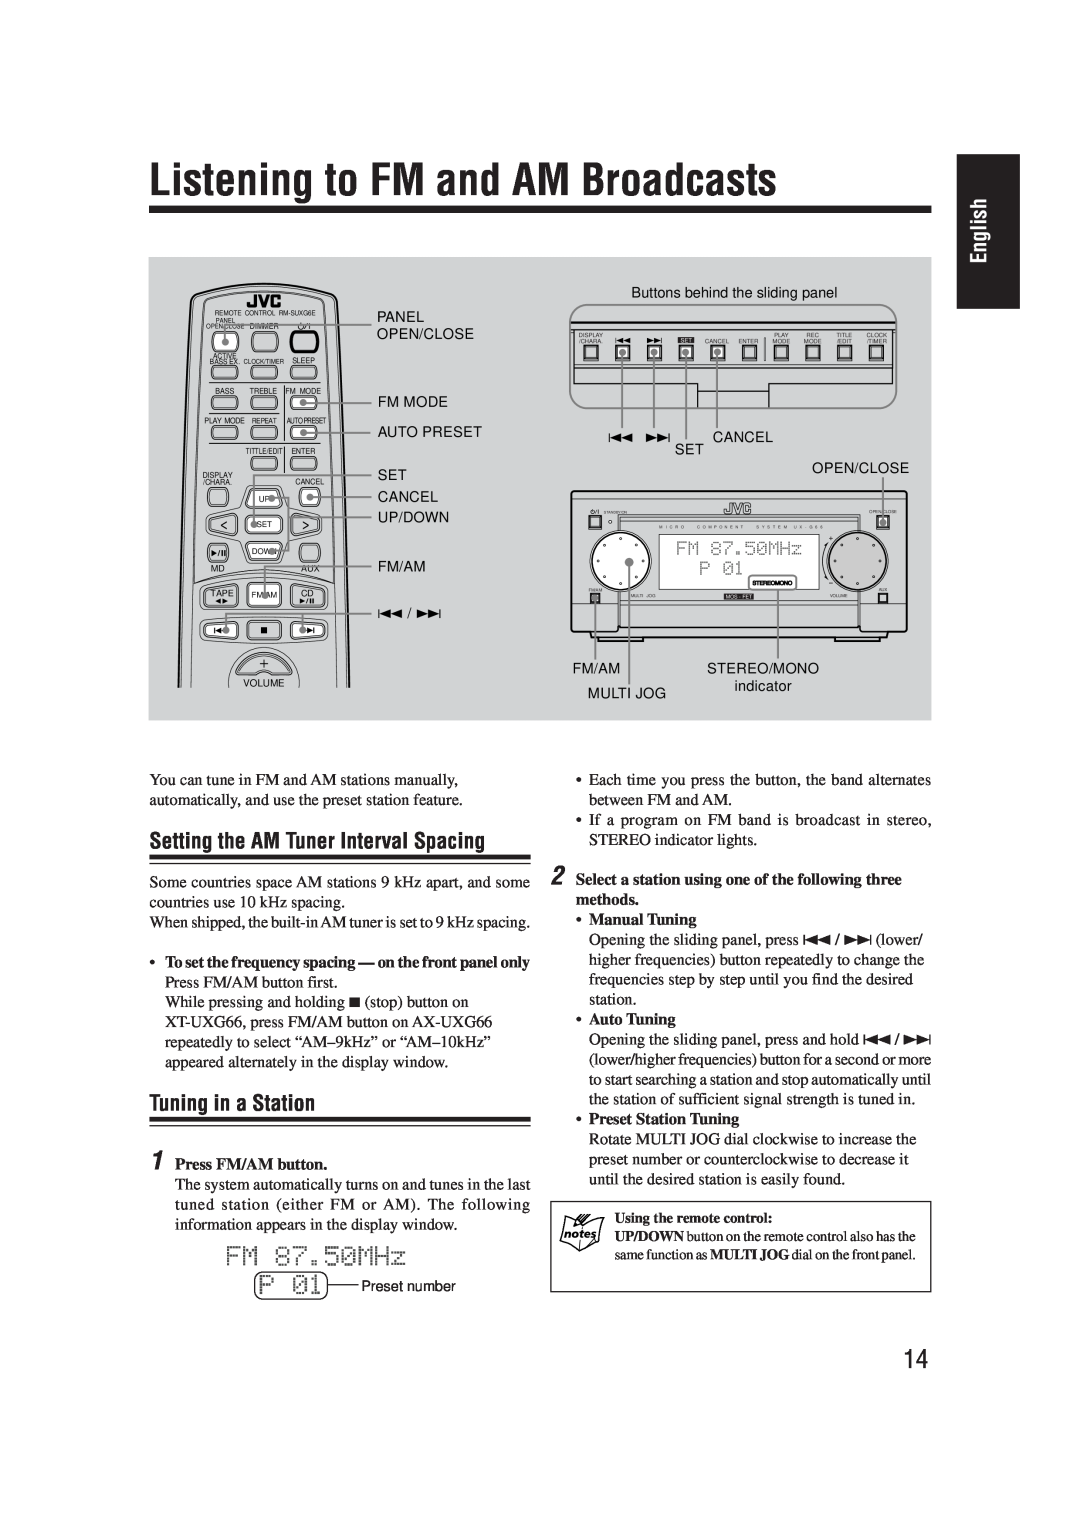 JVC AX-UXG66 manual Listening to FM and AM Broadcasts, Tuning in a Station, Setting the AM Tuner Interval Spacing, English 